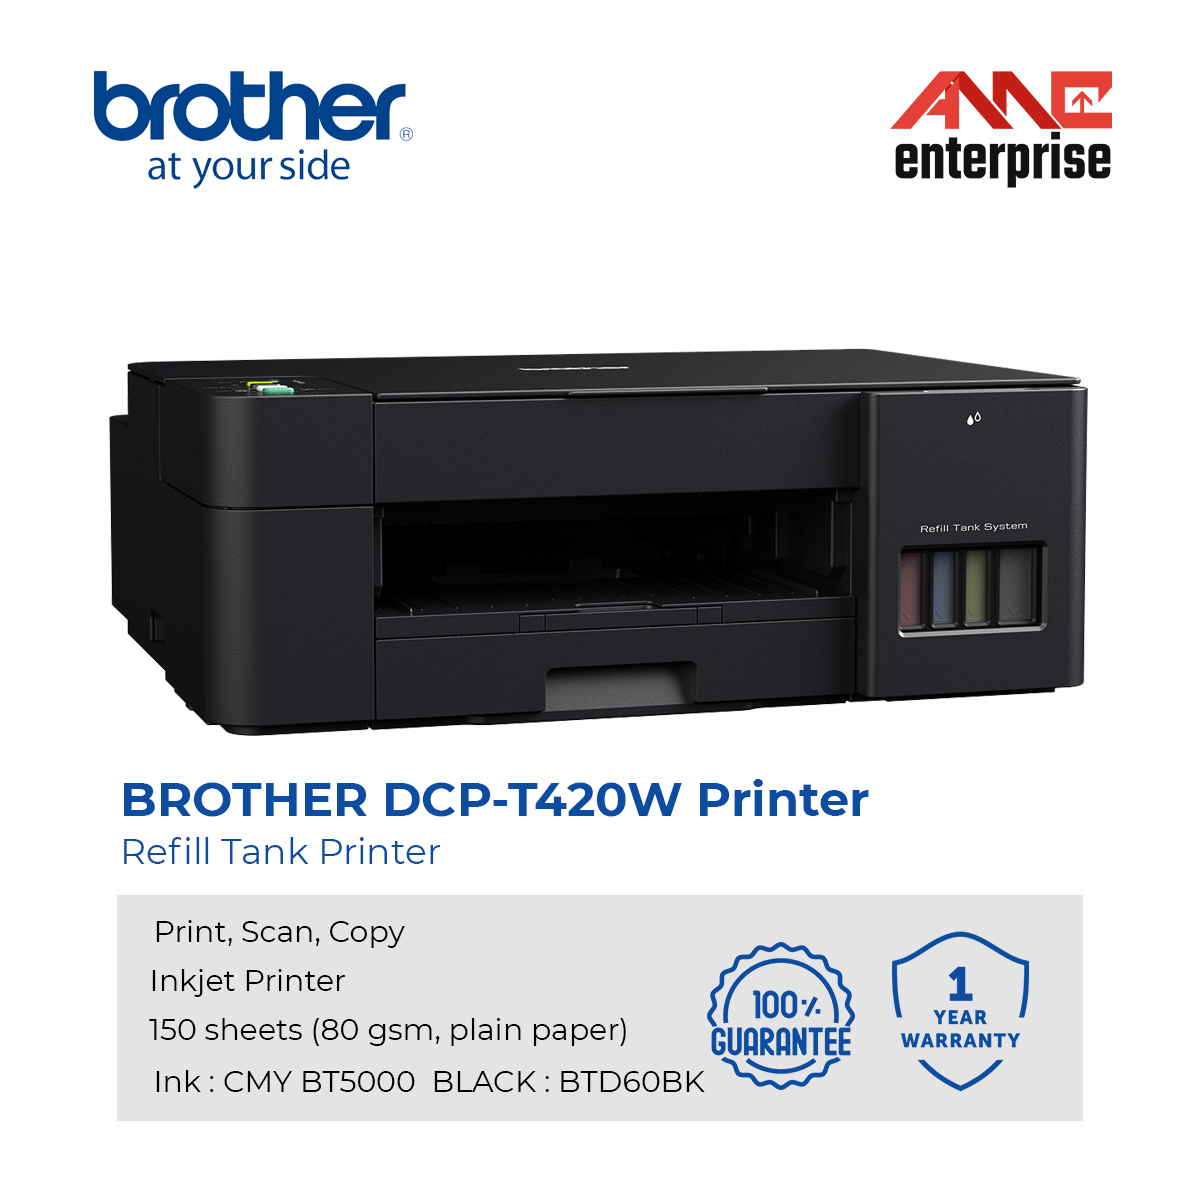 Brother DCP-T420W Refill Tank Printer (1)